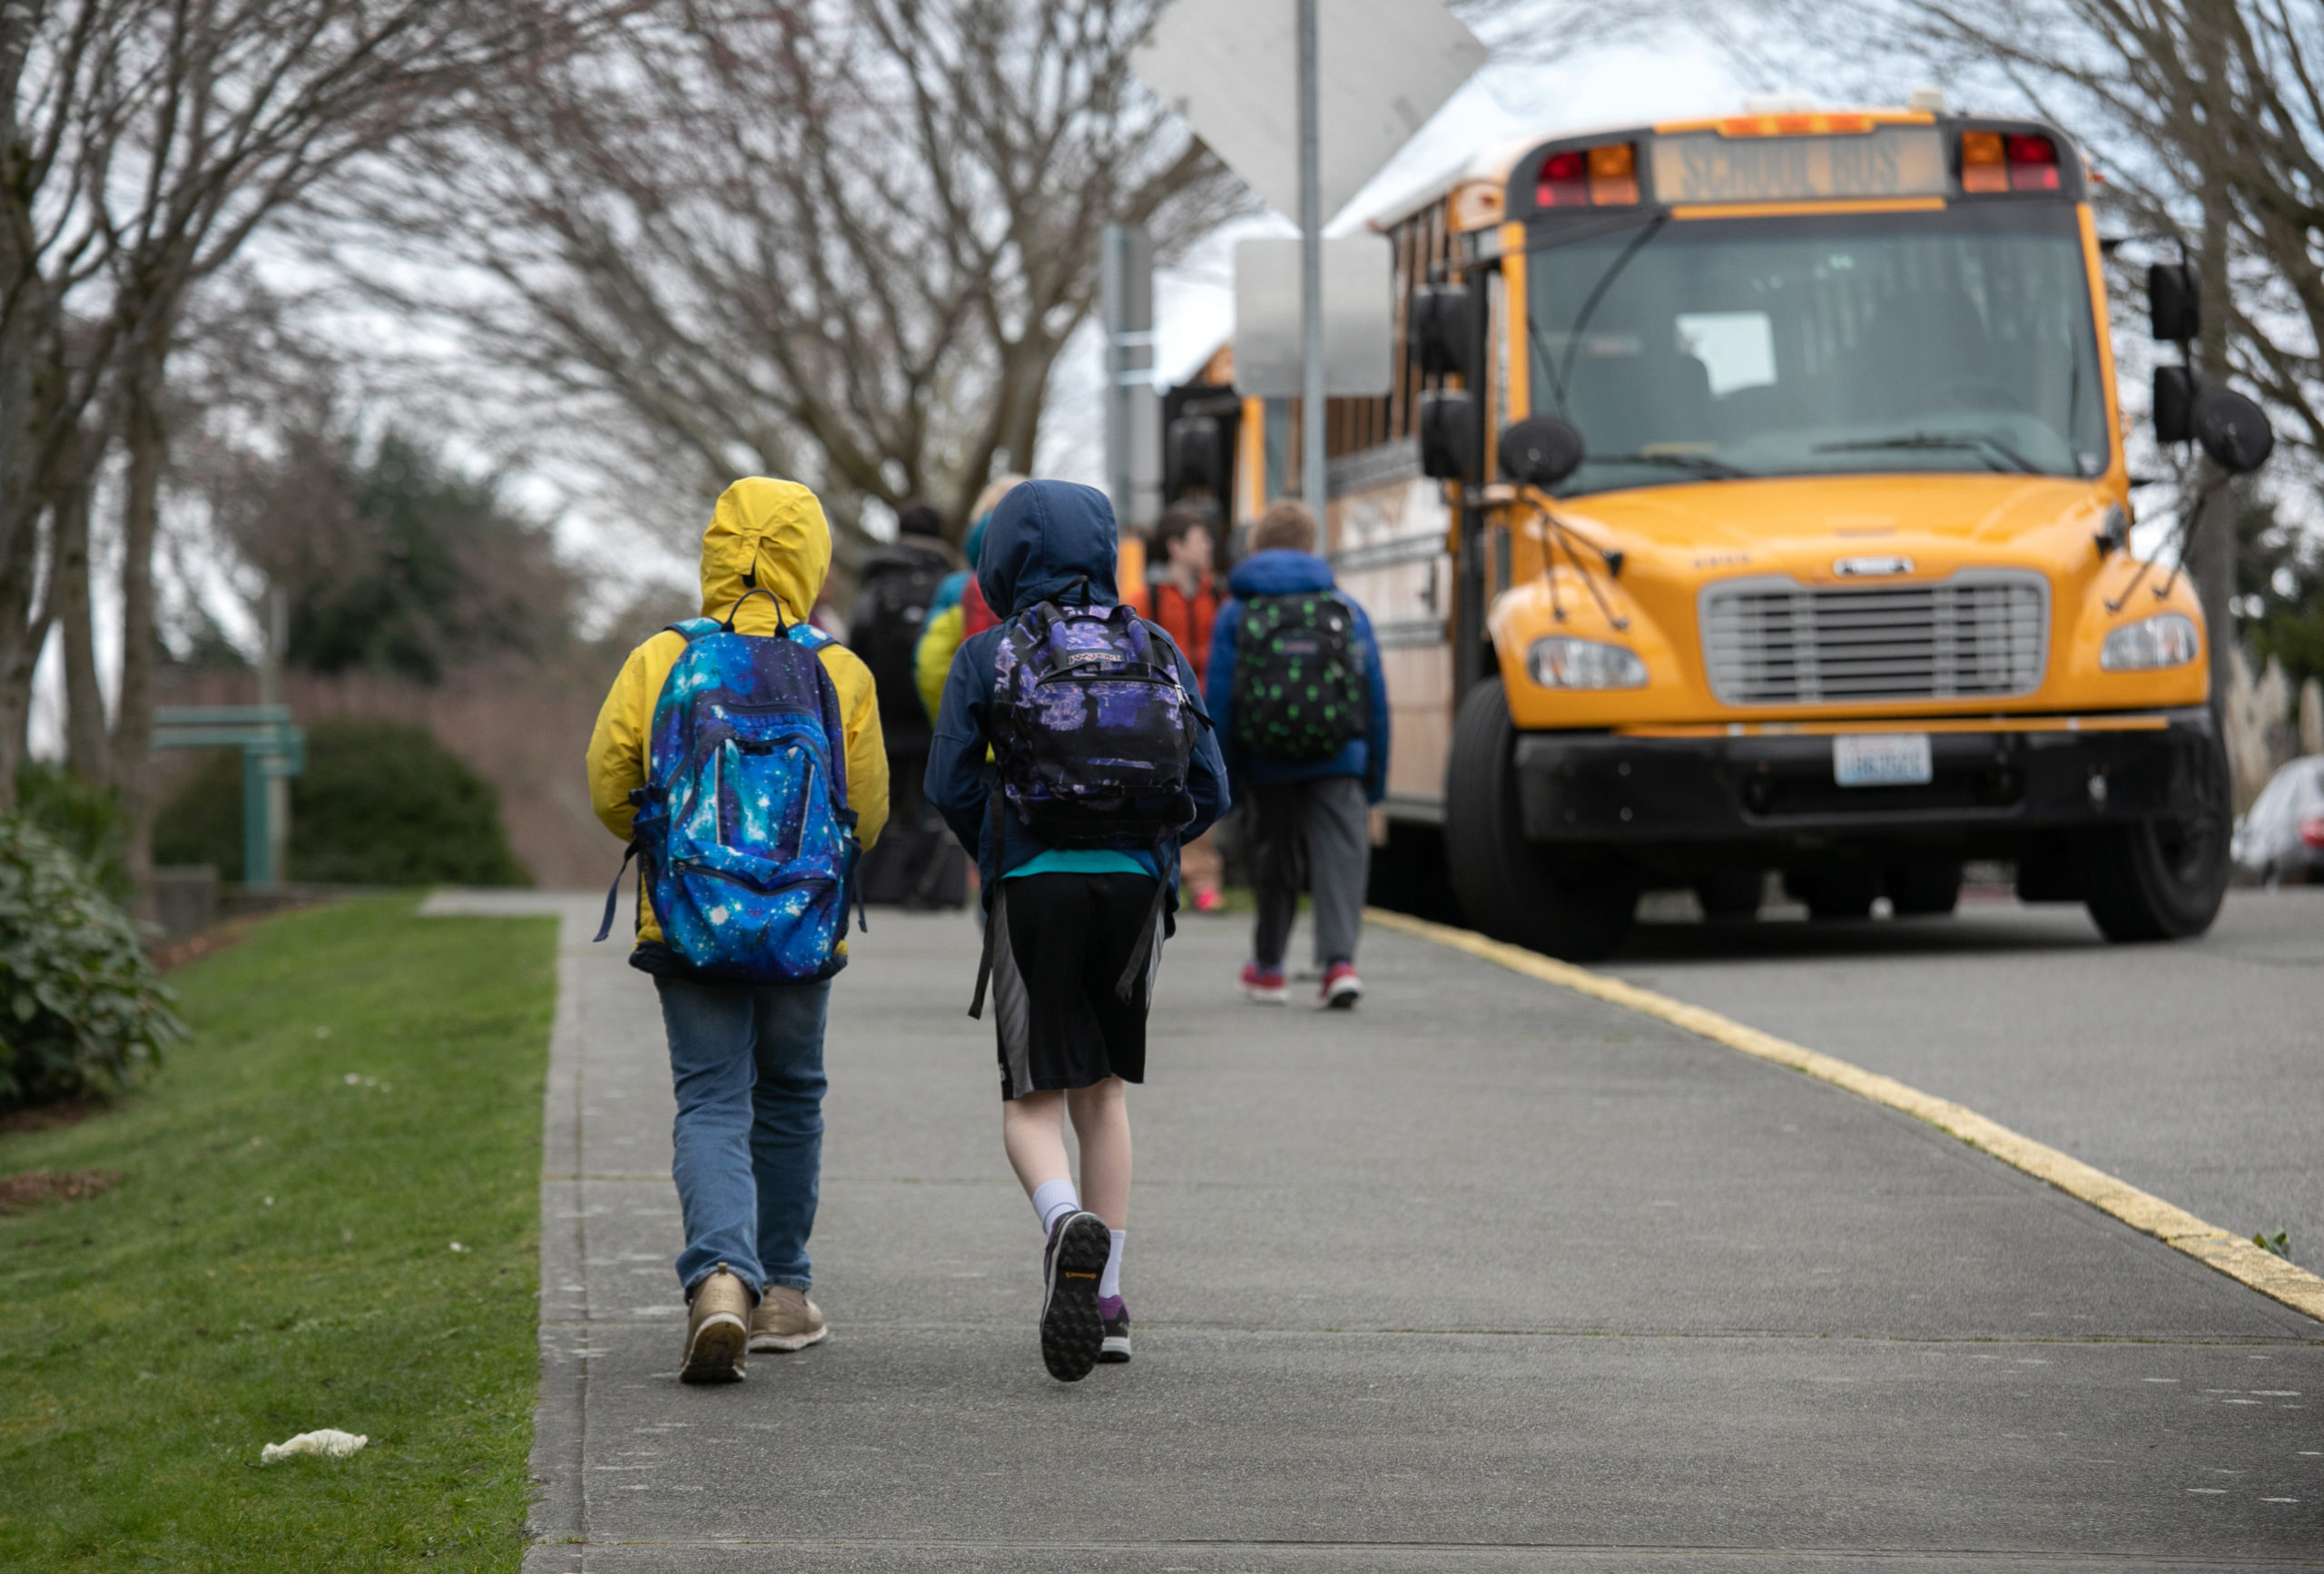 Students leave the Thurgood Marshal Elementary school after the Seattle Public School system was abruptly closed due to coronavirus fears on March 11, 2020 in Seattle, Washington. Schools will be closed for a minimum of two weeks. The system is the largest public school district in Washington State. (Photo by John Moore/Getty Images)